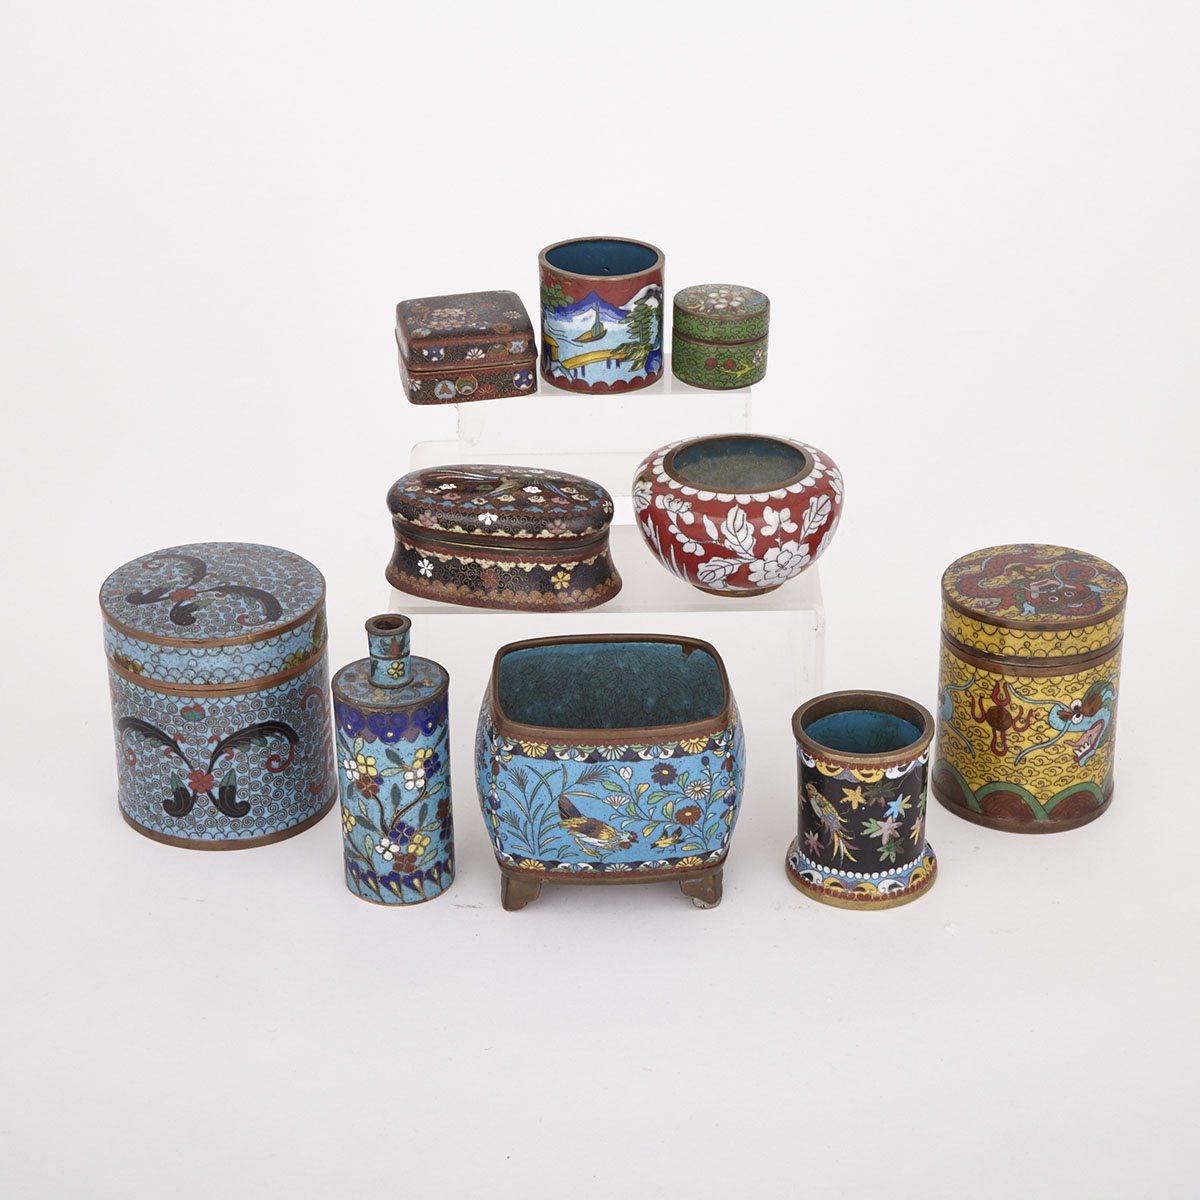 Group of Ten Cloisonne Items, Late 19th - Early 20th Century